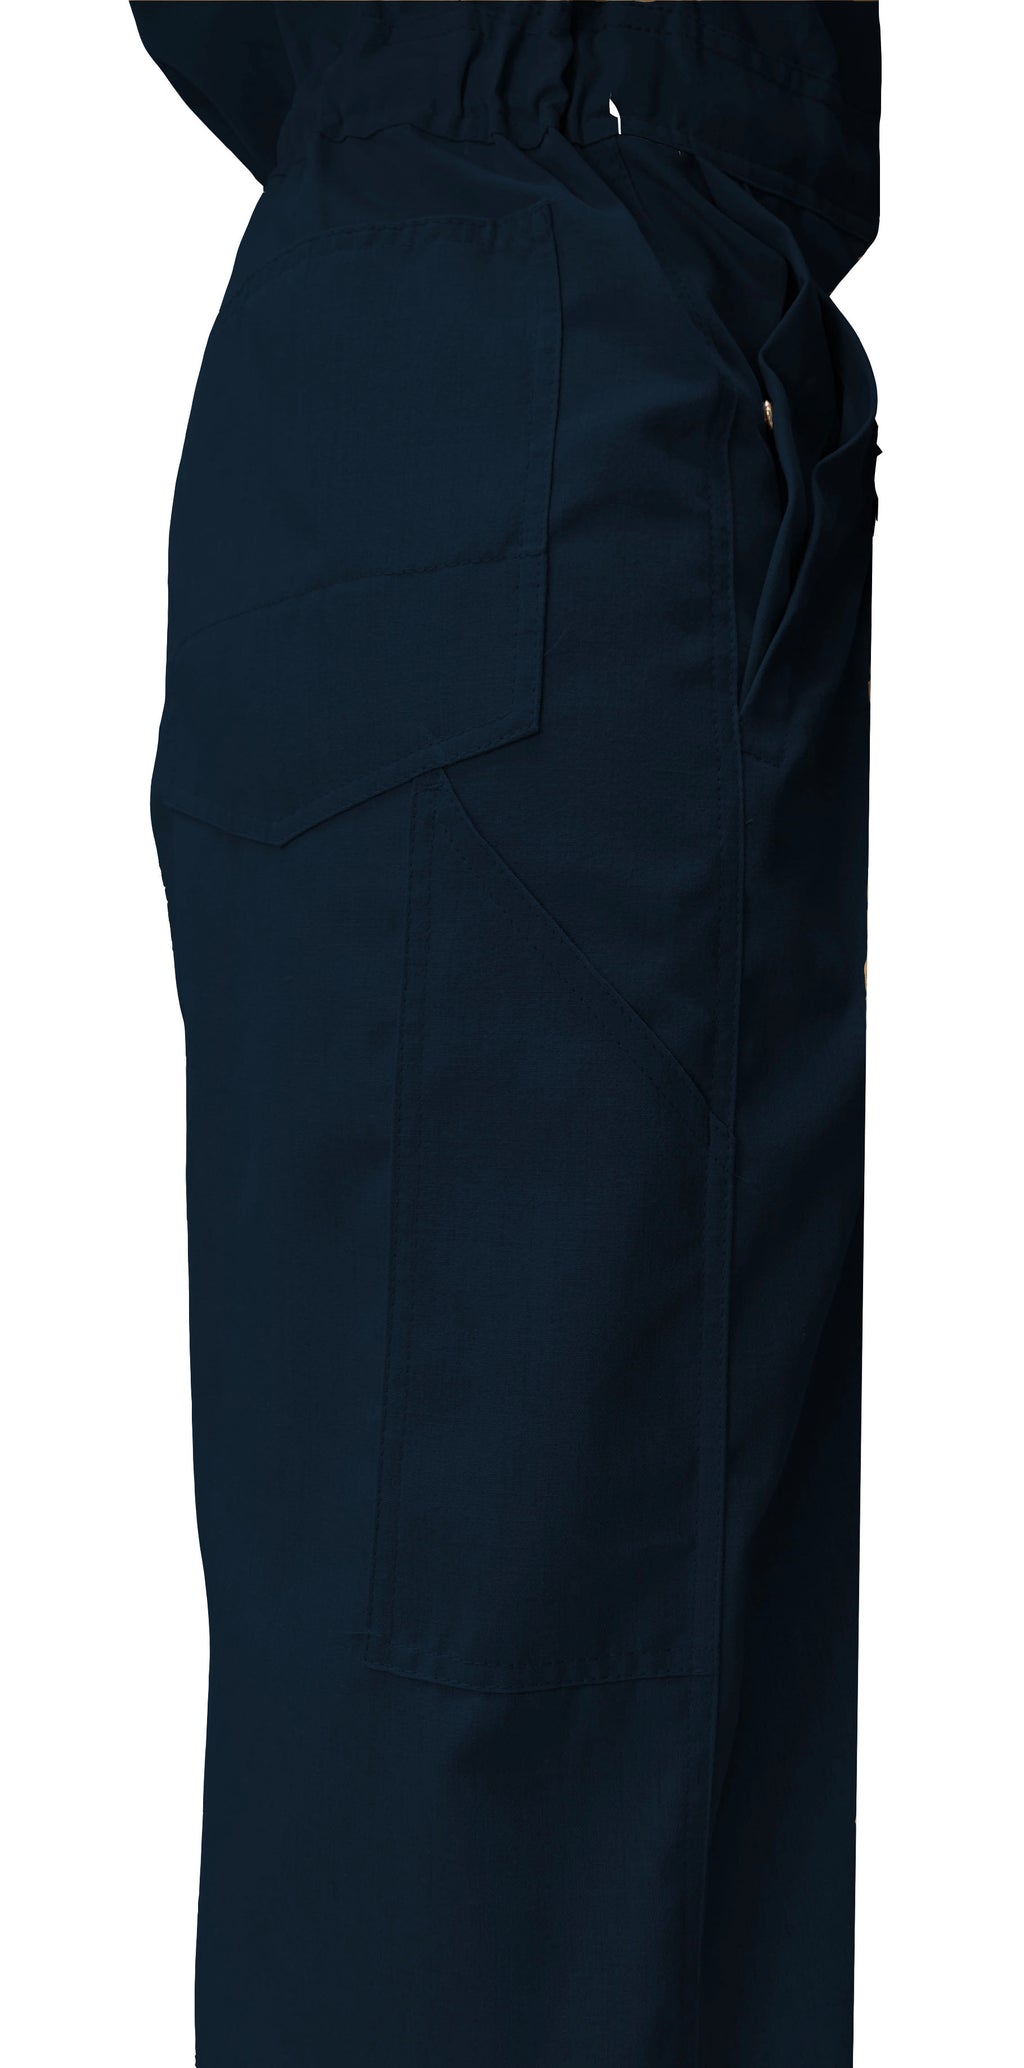 FlameRwear, FR Coverall Deluxe, fwCT1-6, Tecasafe One 5.7 oz, Cat2, Navy